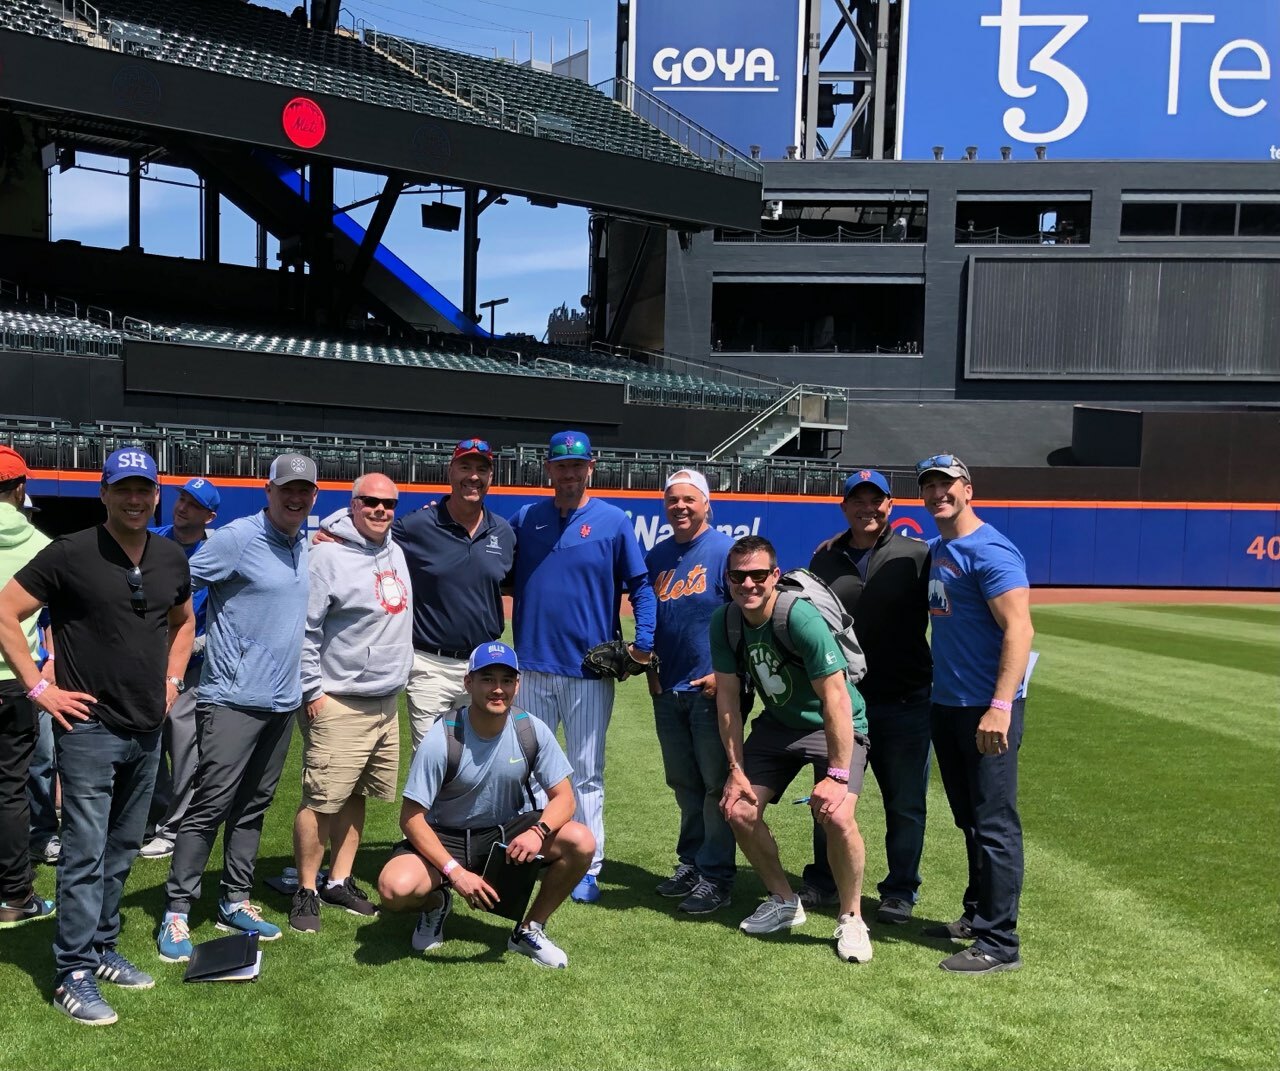 Members of the Sag Harbor/Bridgehampton Little League with New York Mets pitching coach Jeremy Hefner at the Future Stars program at Citi Field on Sunday.